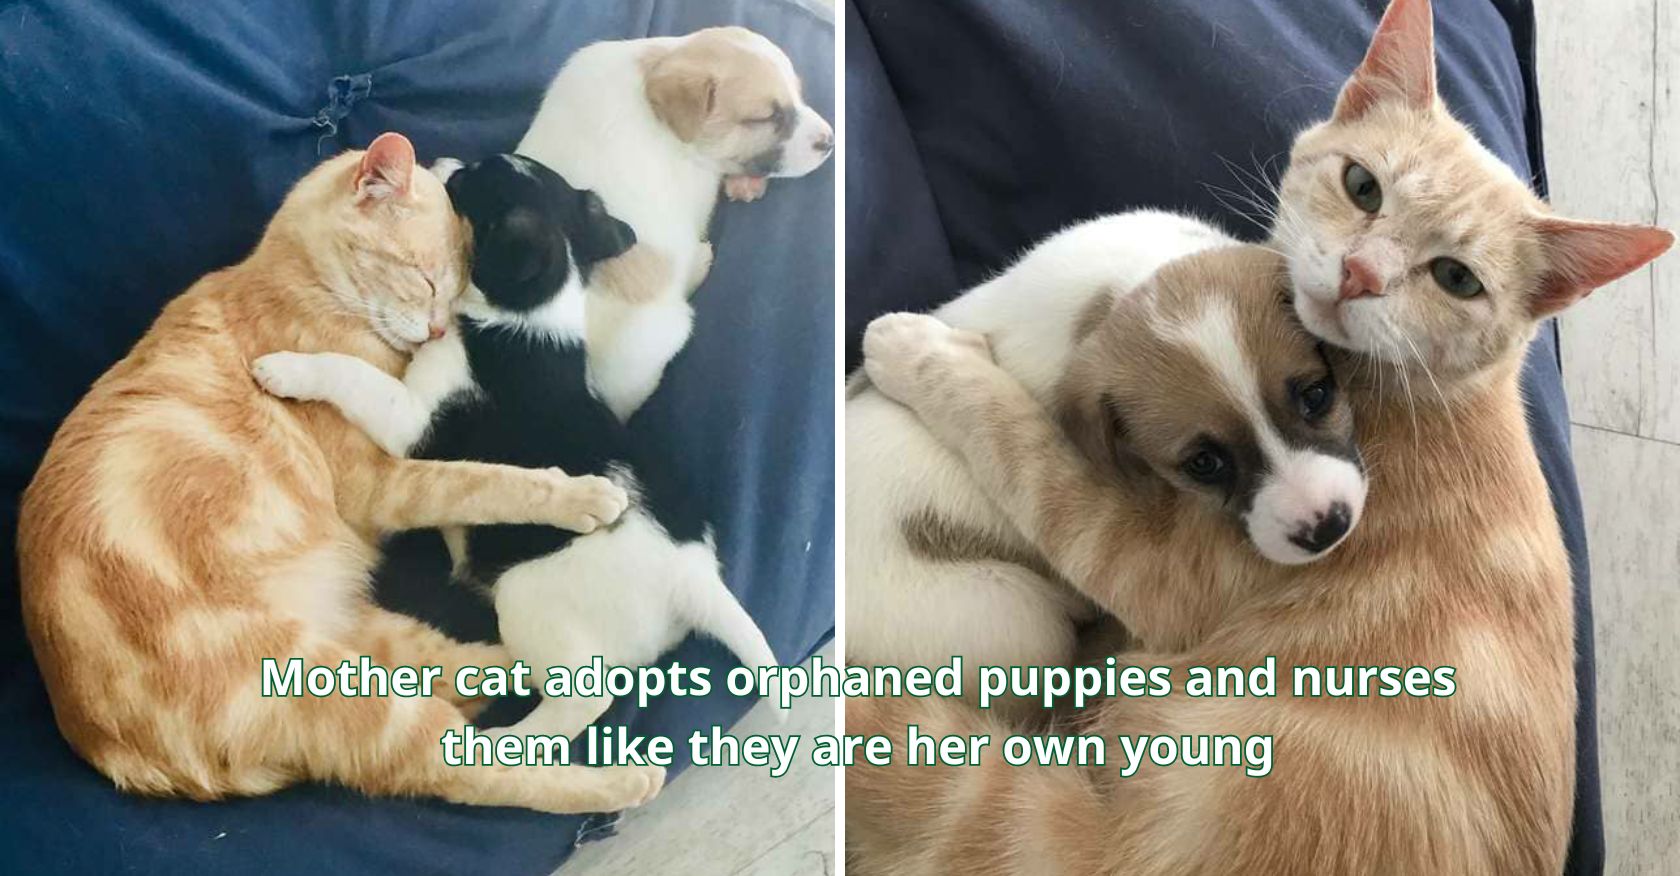 Mother cat adopts orphaned puppies and nurses them like they are her own young